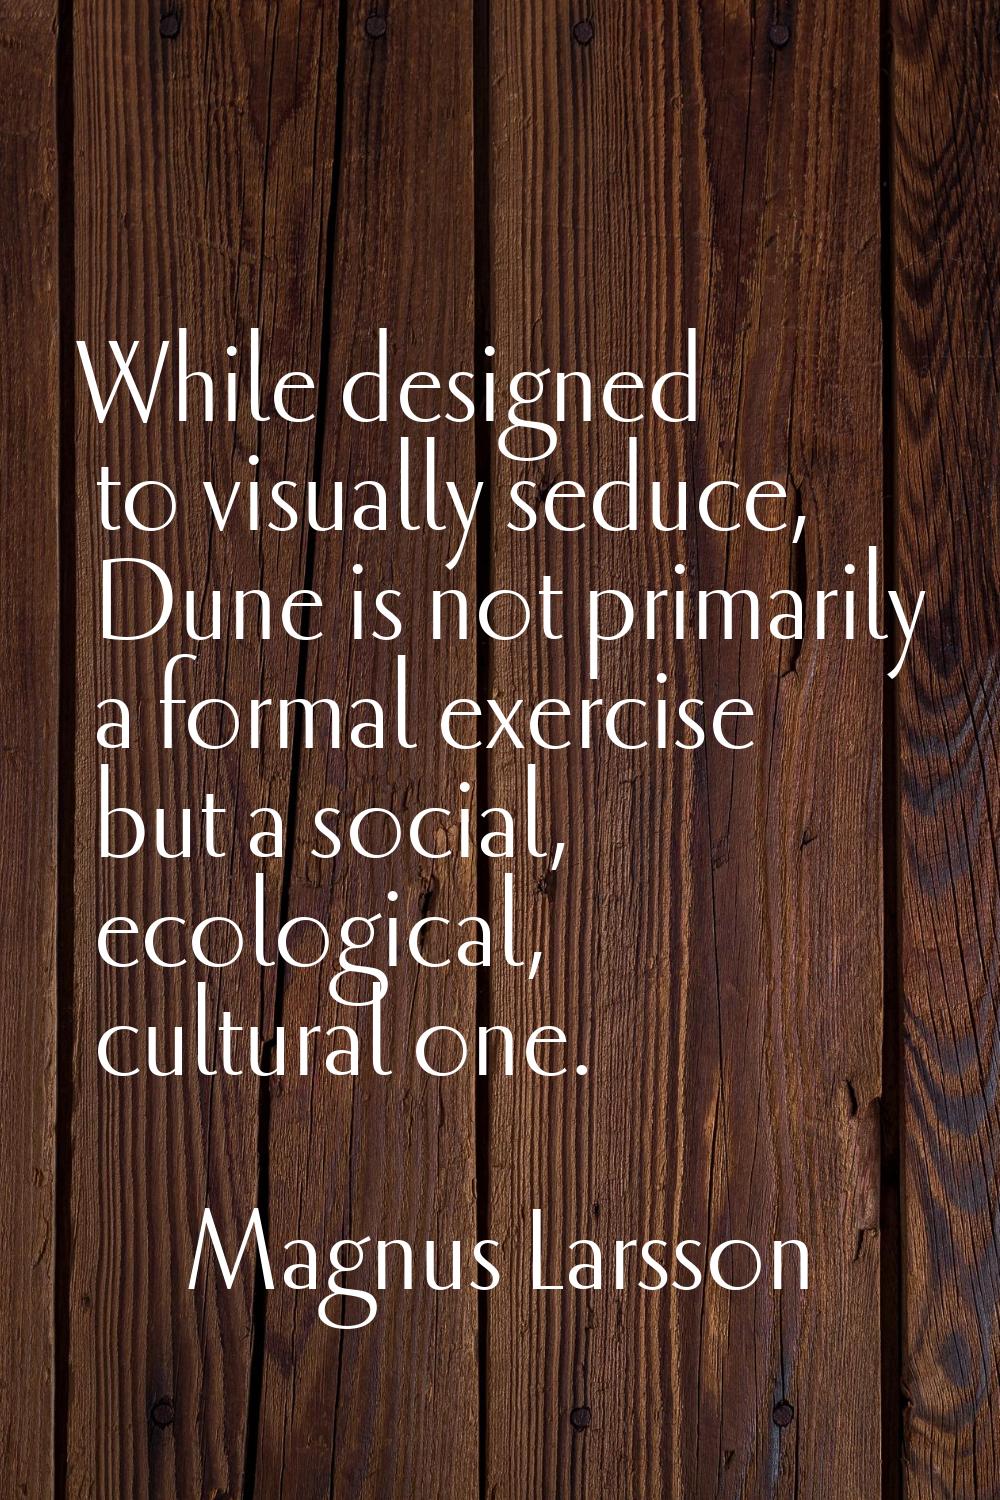 While designed to visually seduce, Dune is not primarily a formal exercise but a social, ecological